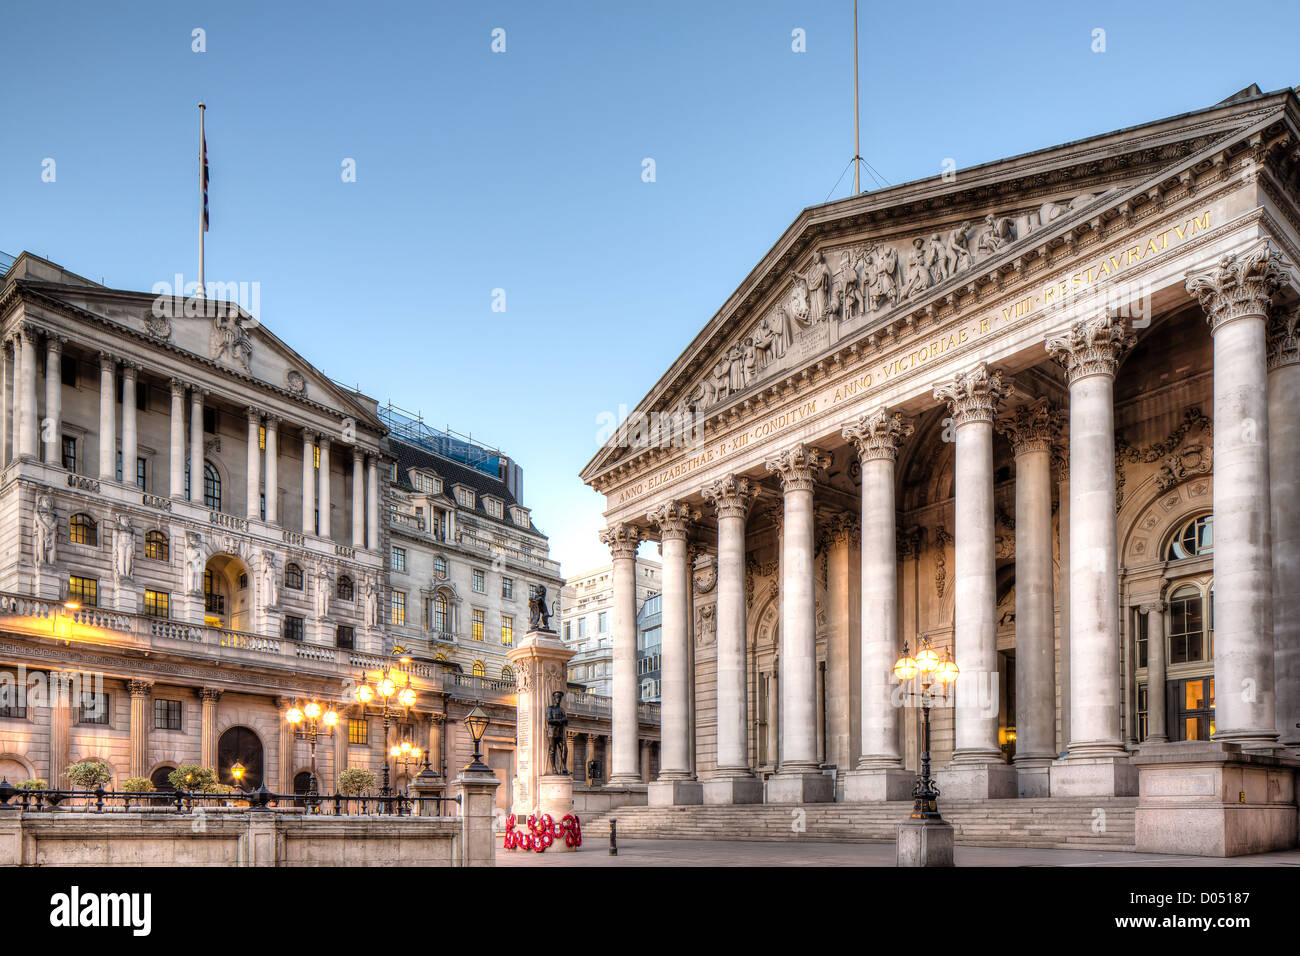 Bank of England and the Royal Exchange in London with street lights on Stock Photo